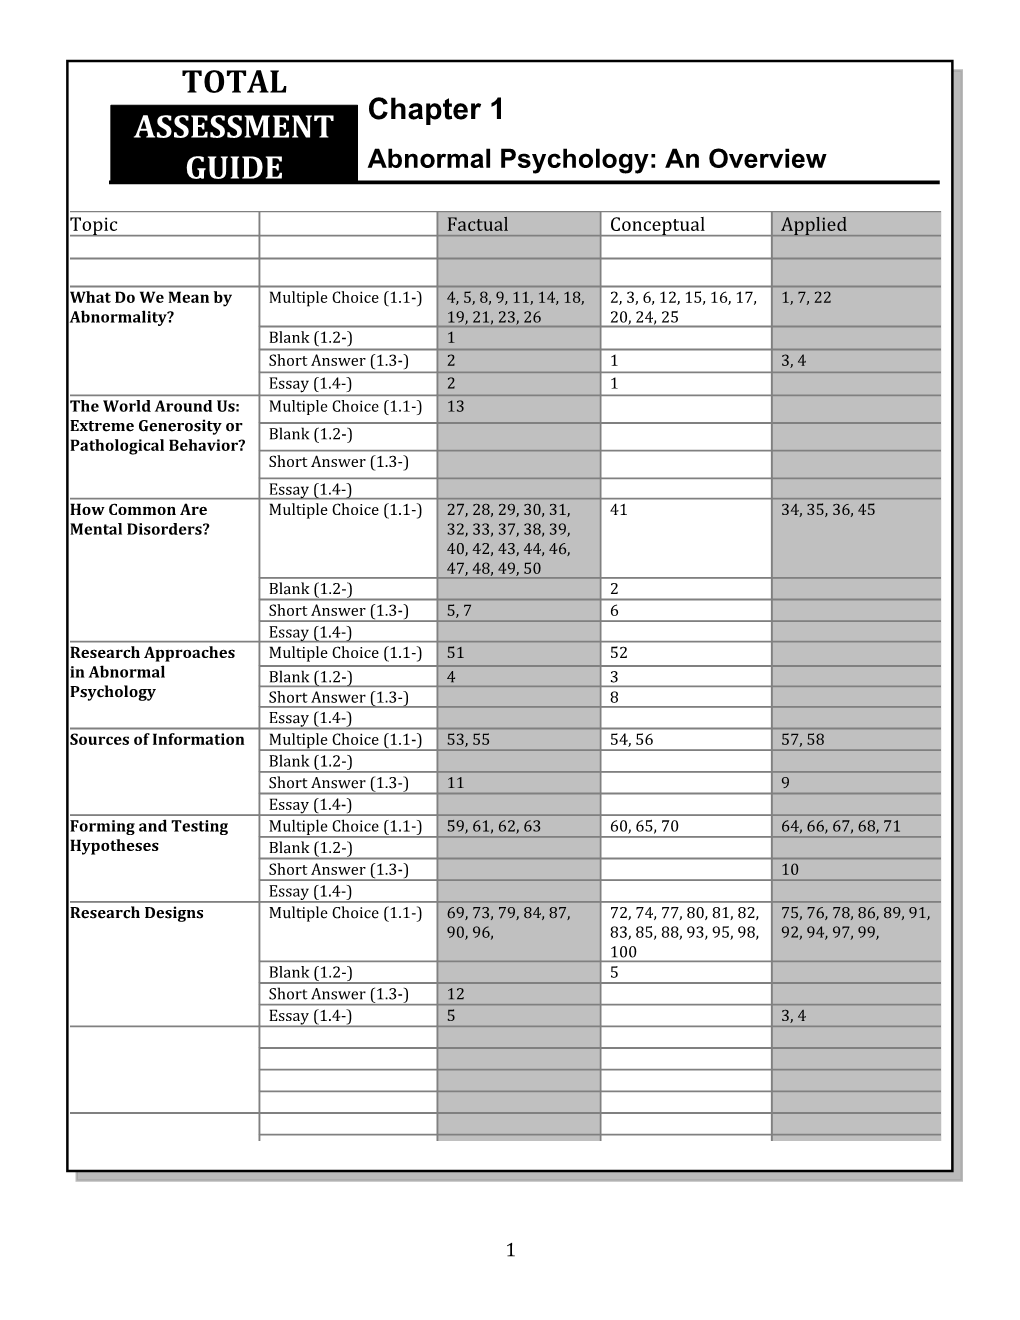 Chapter 1: Abnormal Psychology: an Overview